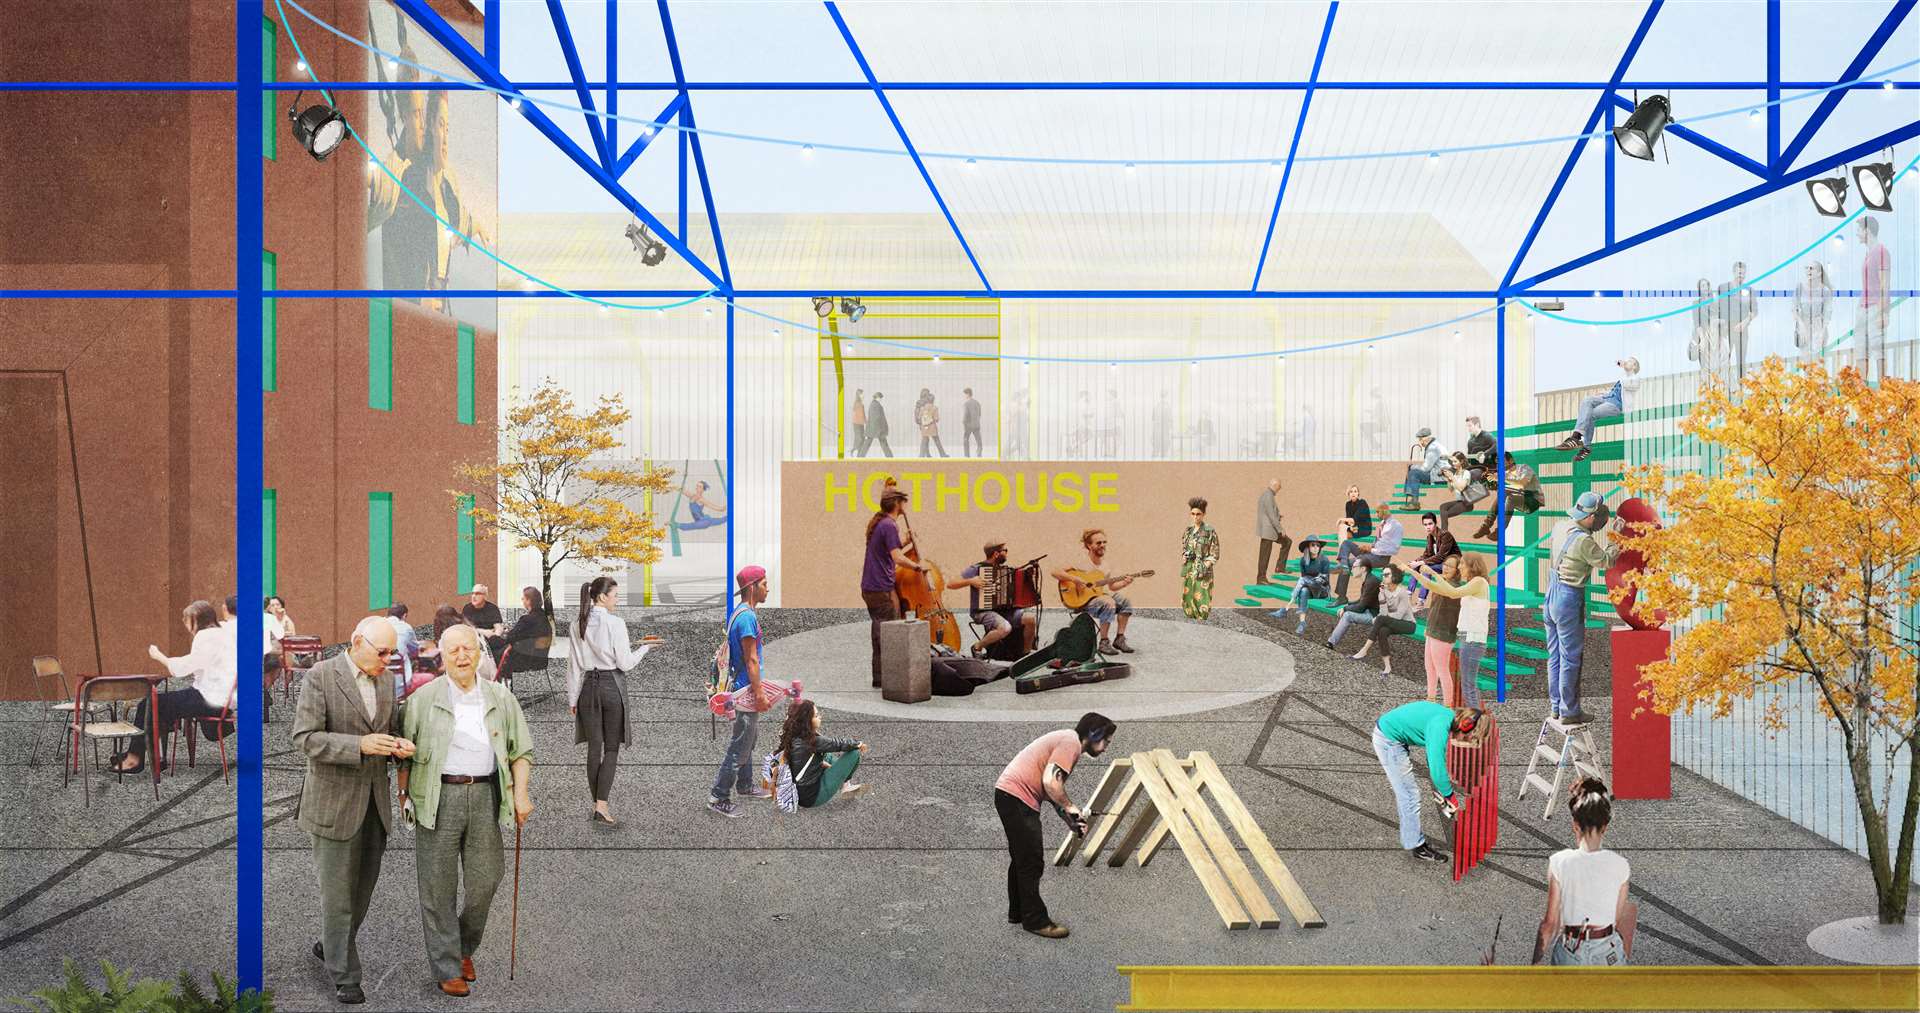 The proposed outdoor performance area